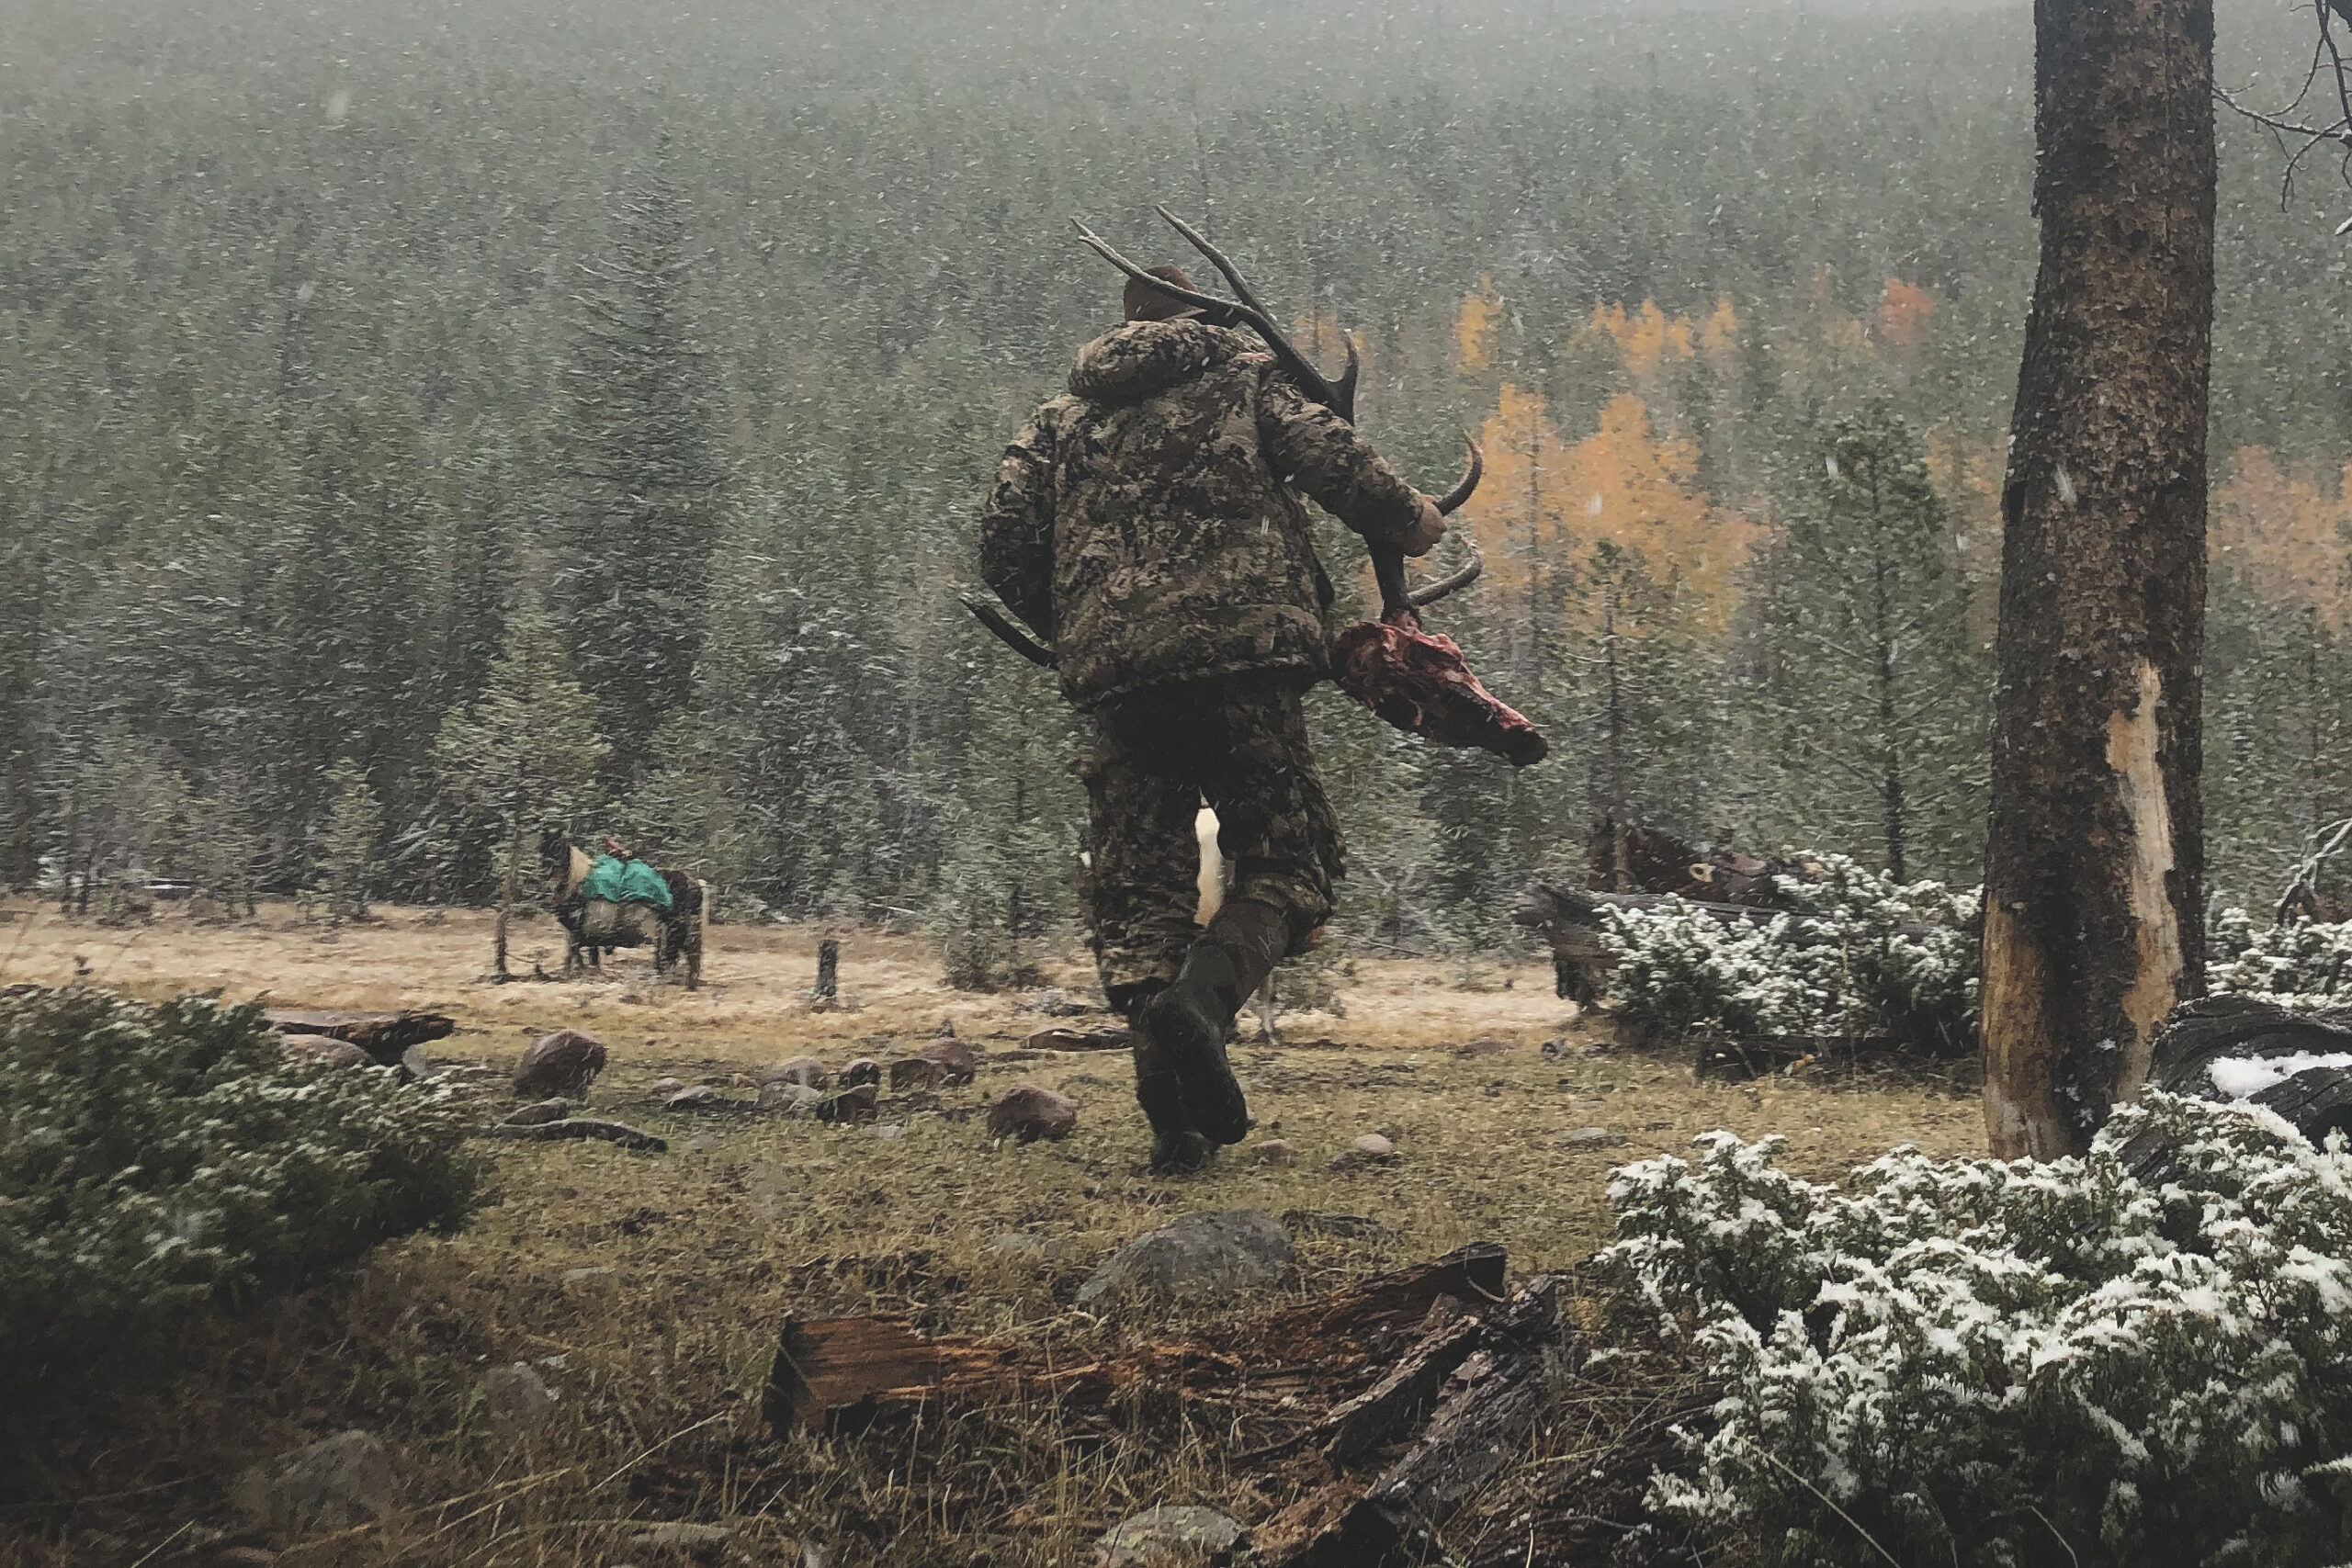 A mountain hunter carries a fresh bull elk skull into a snowy clearing.